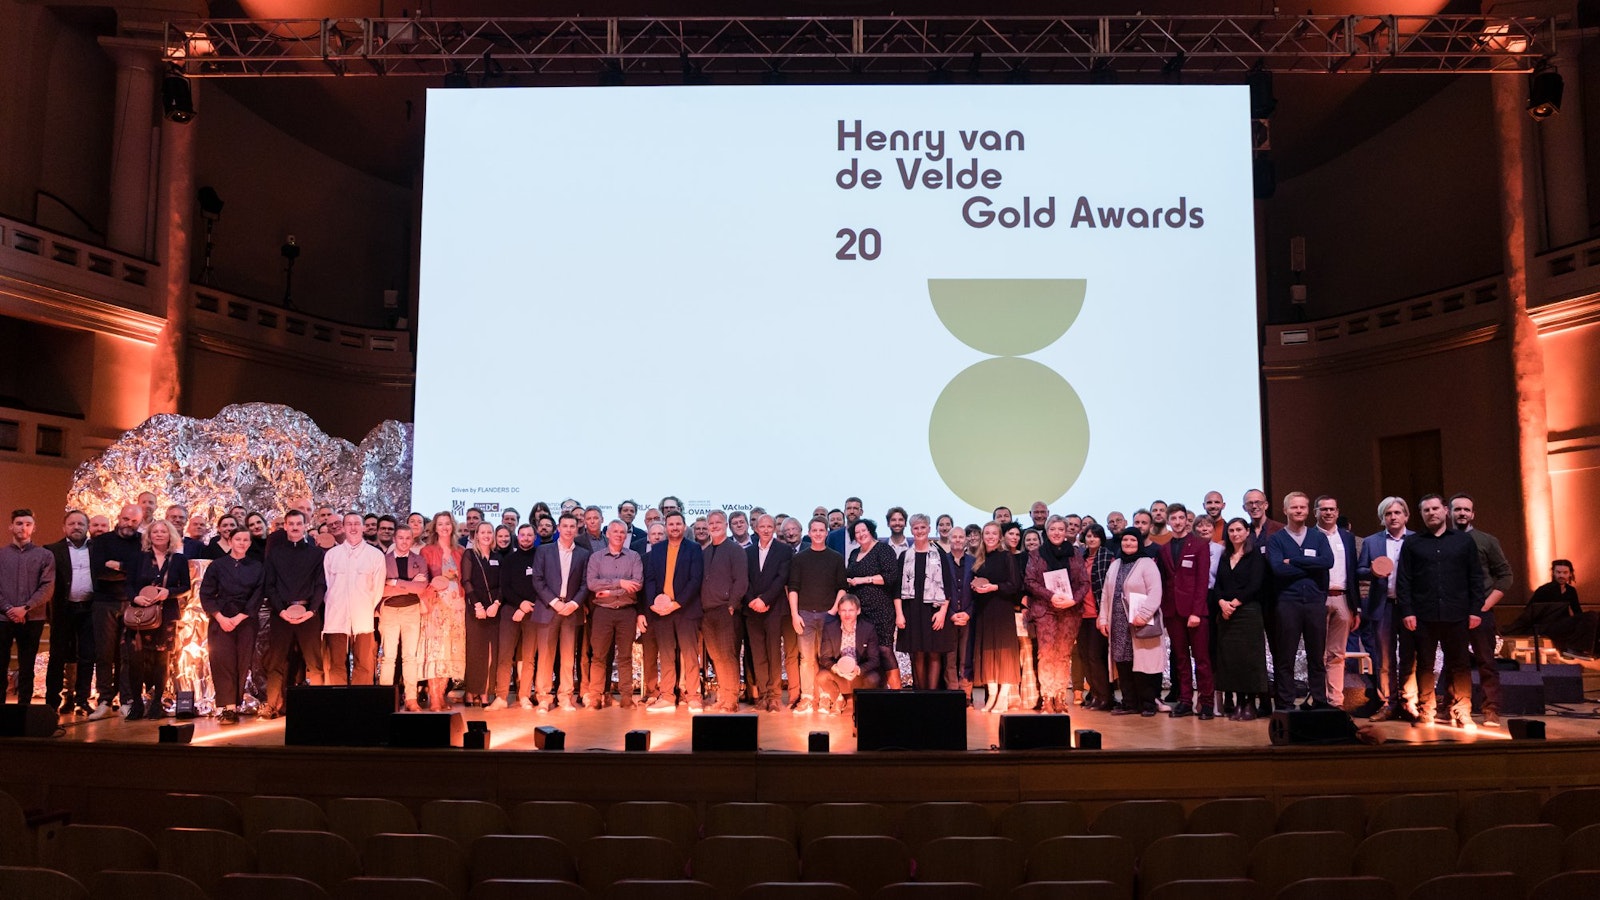 All winners, together on stage © Juan Wyns